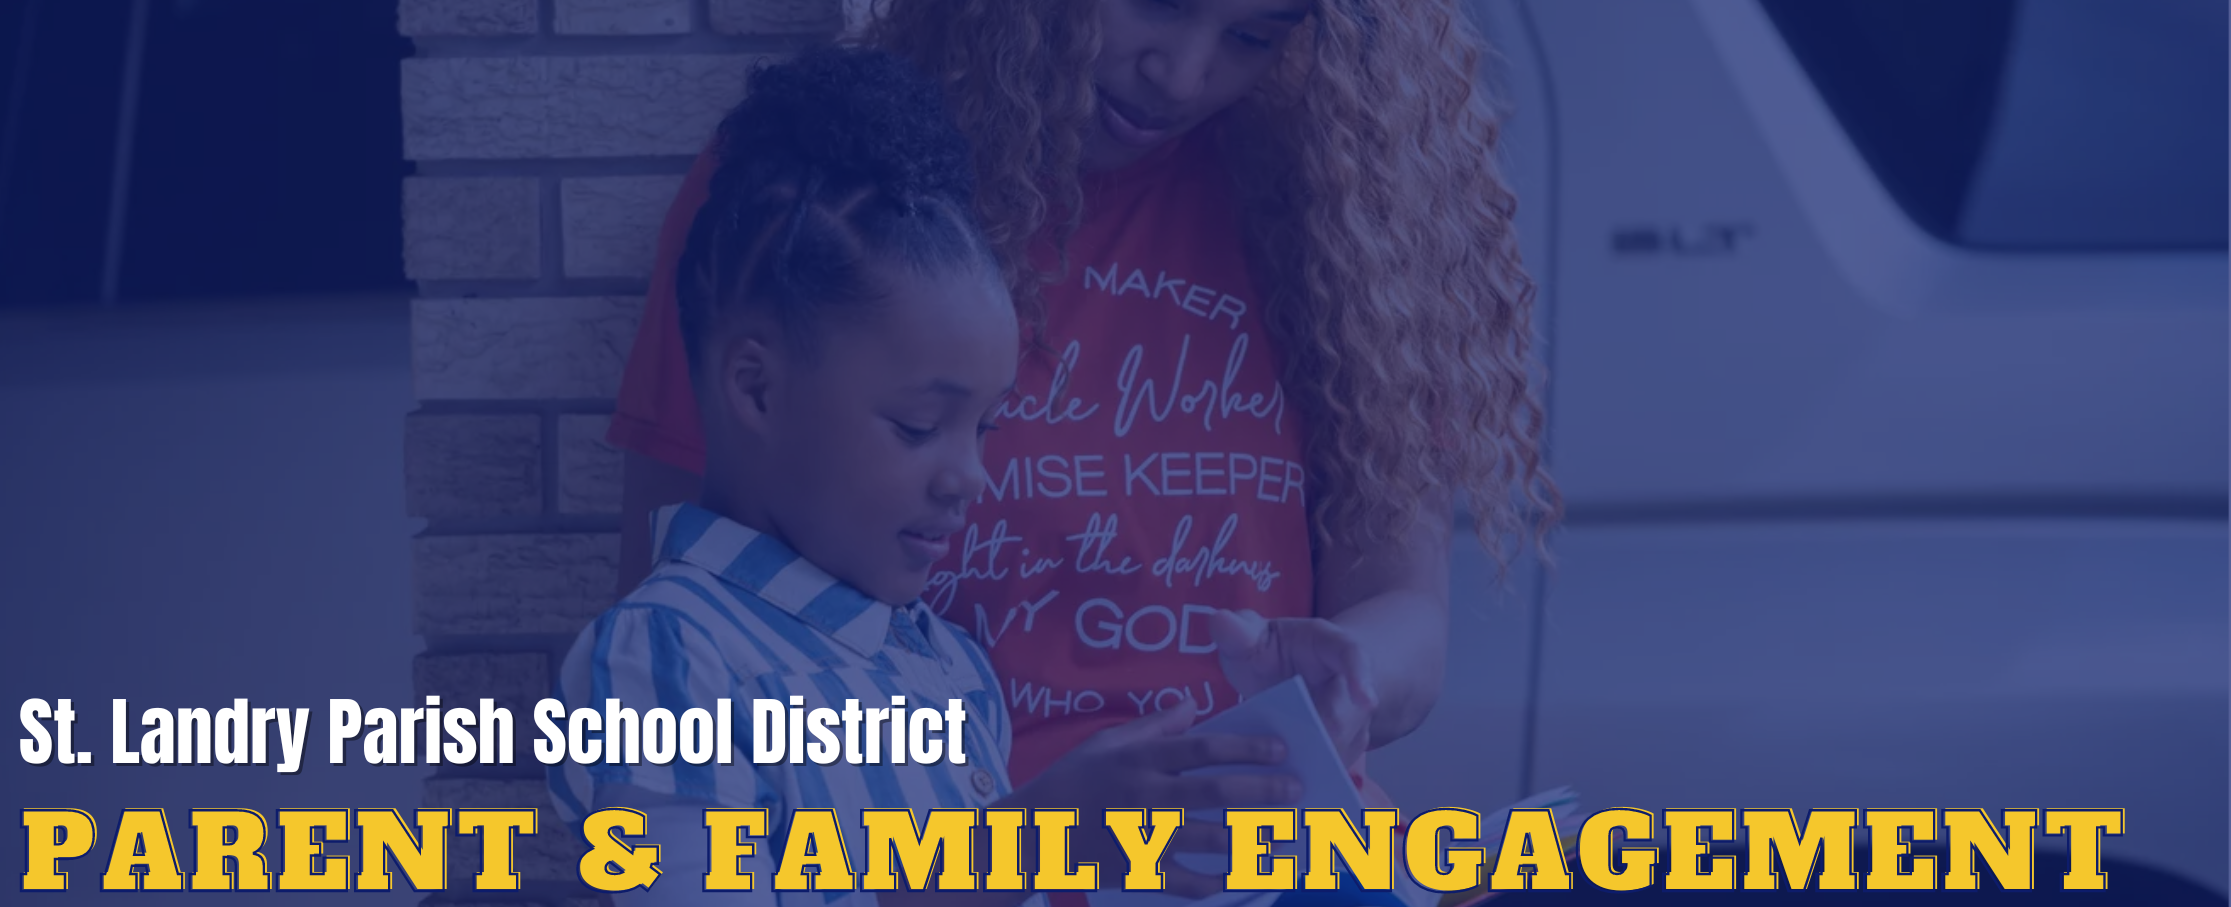 PARENT AND FAMILY ENGAGEMENT